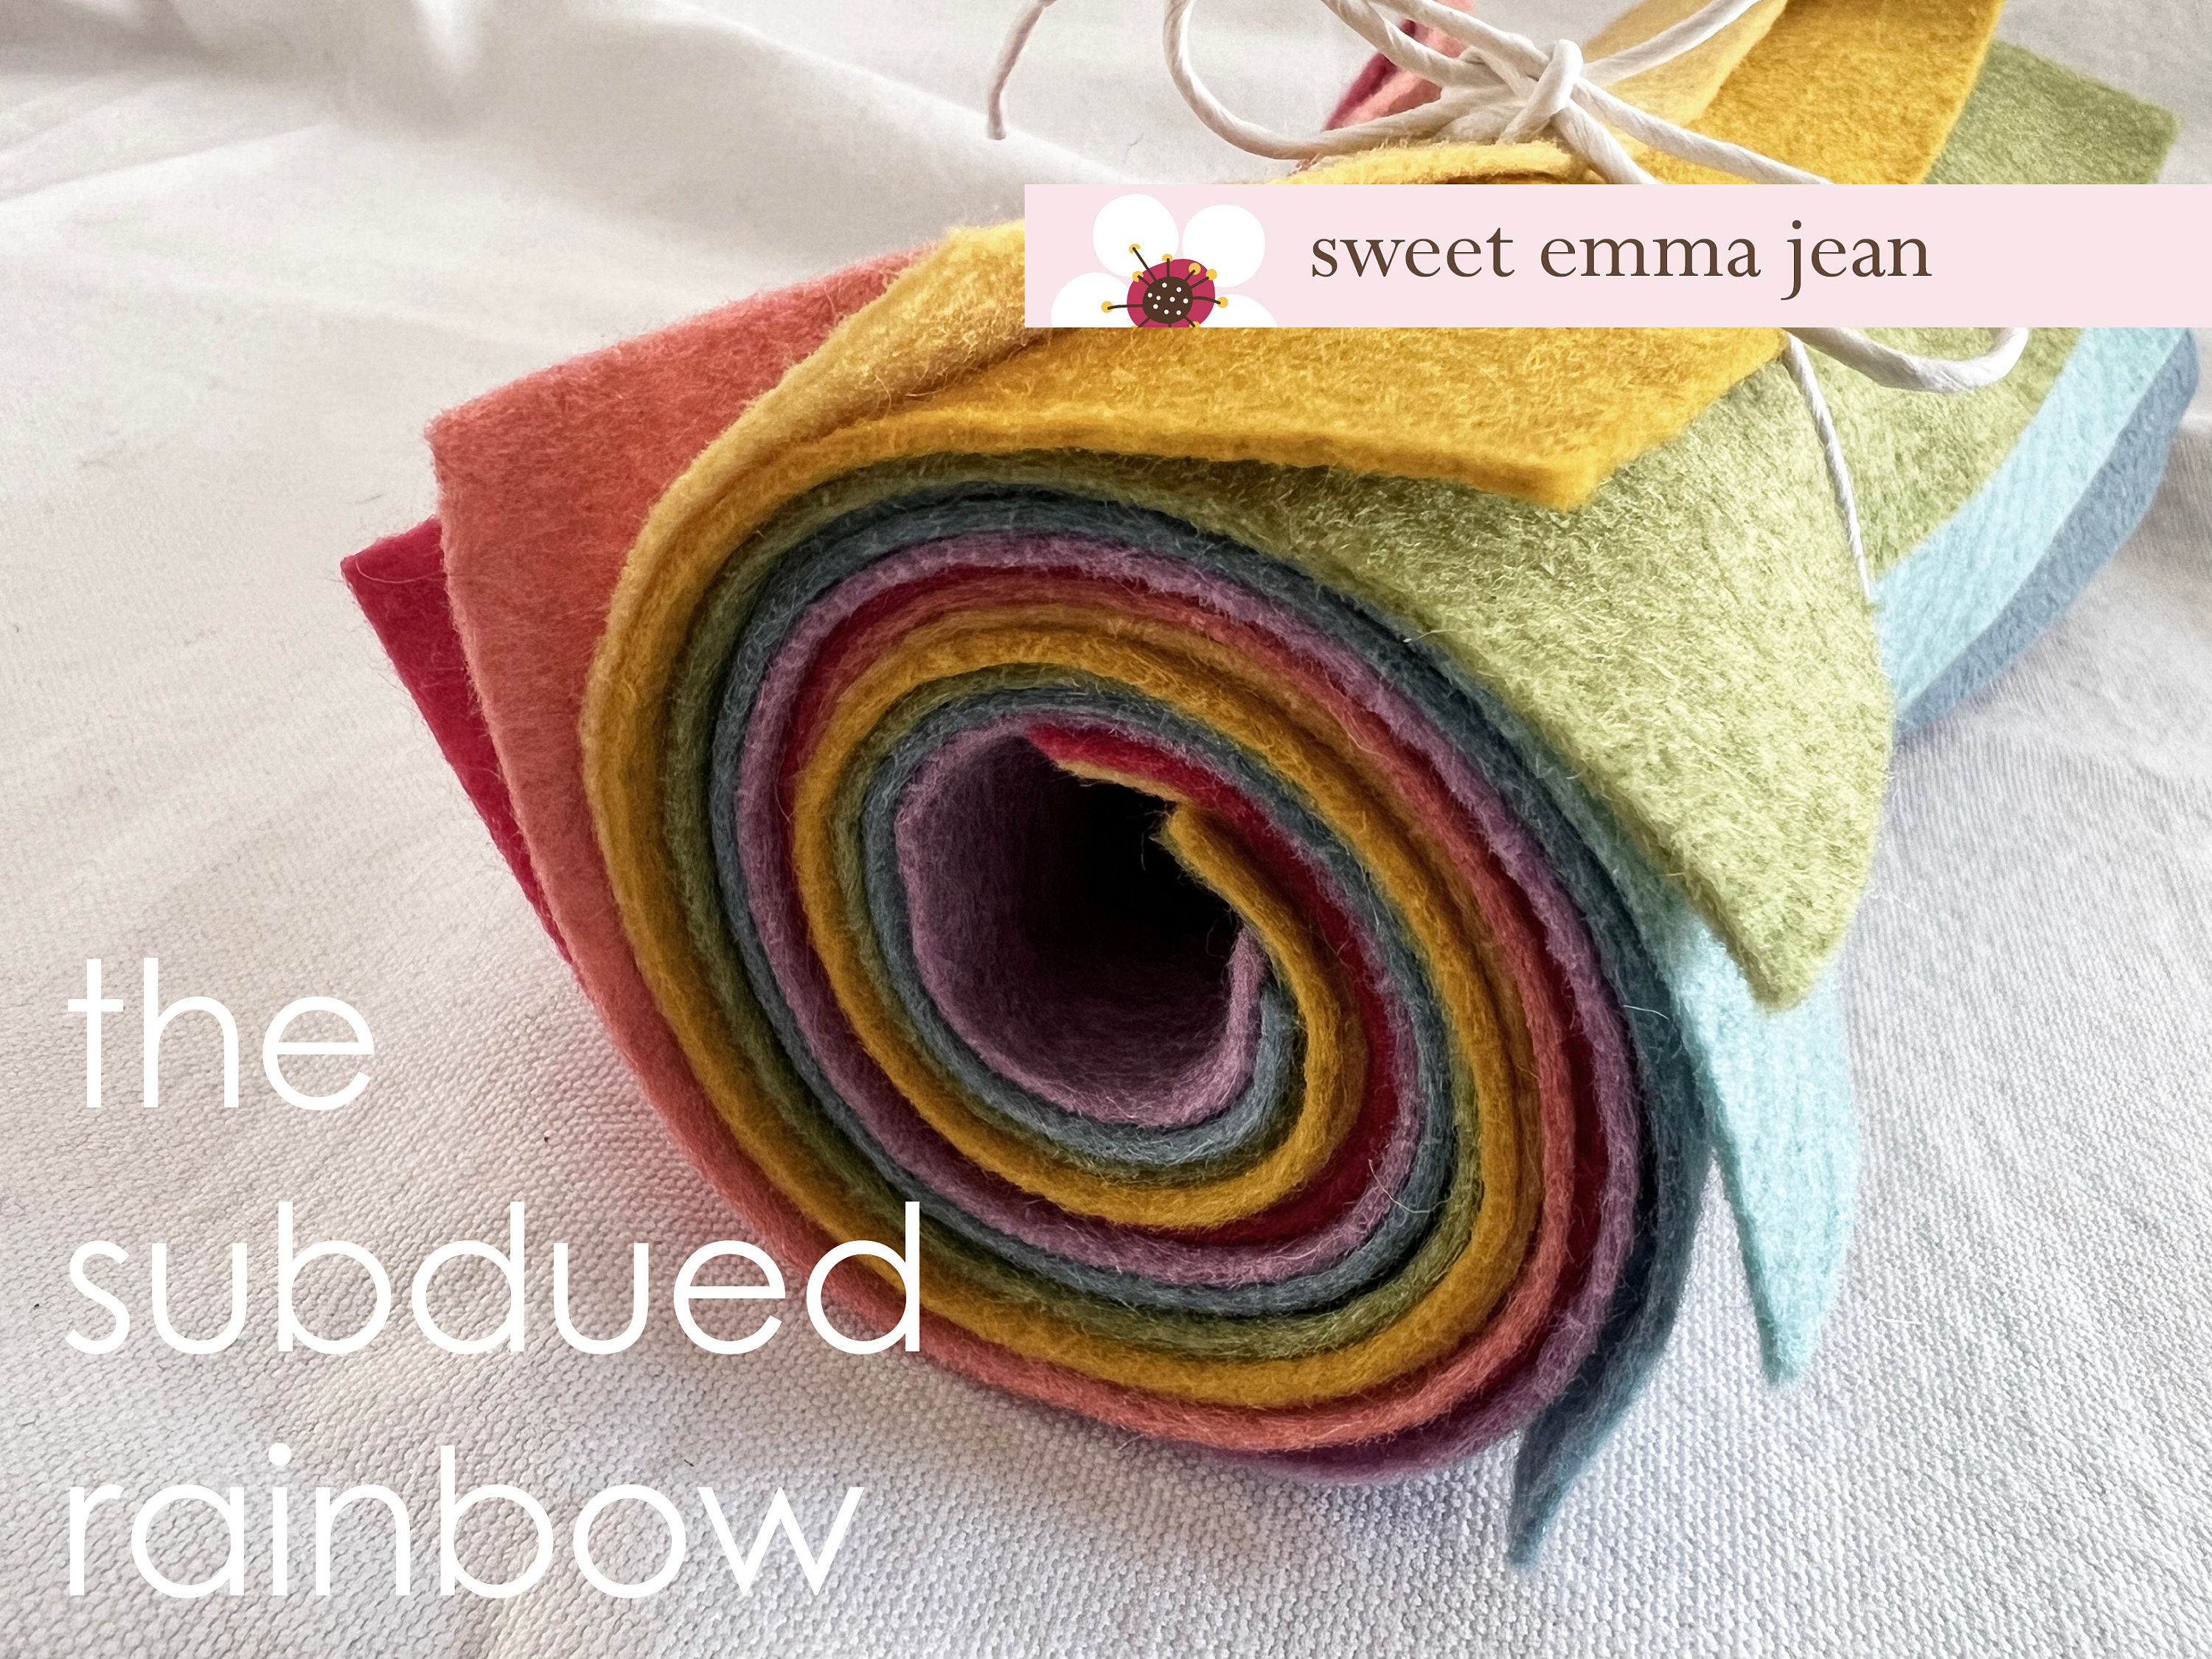 9x12 Wool Felt Sheets the Subdued Rainbow Collection 8 Sheets of Felt 